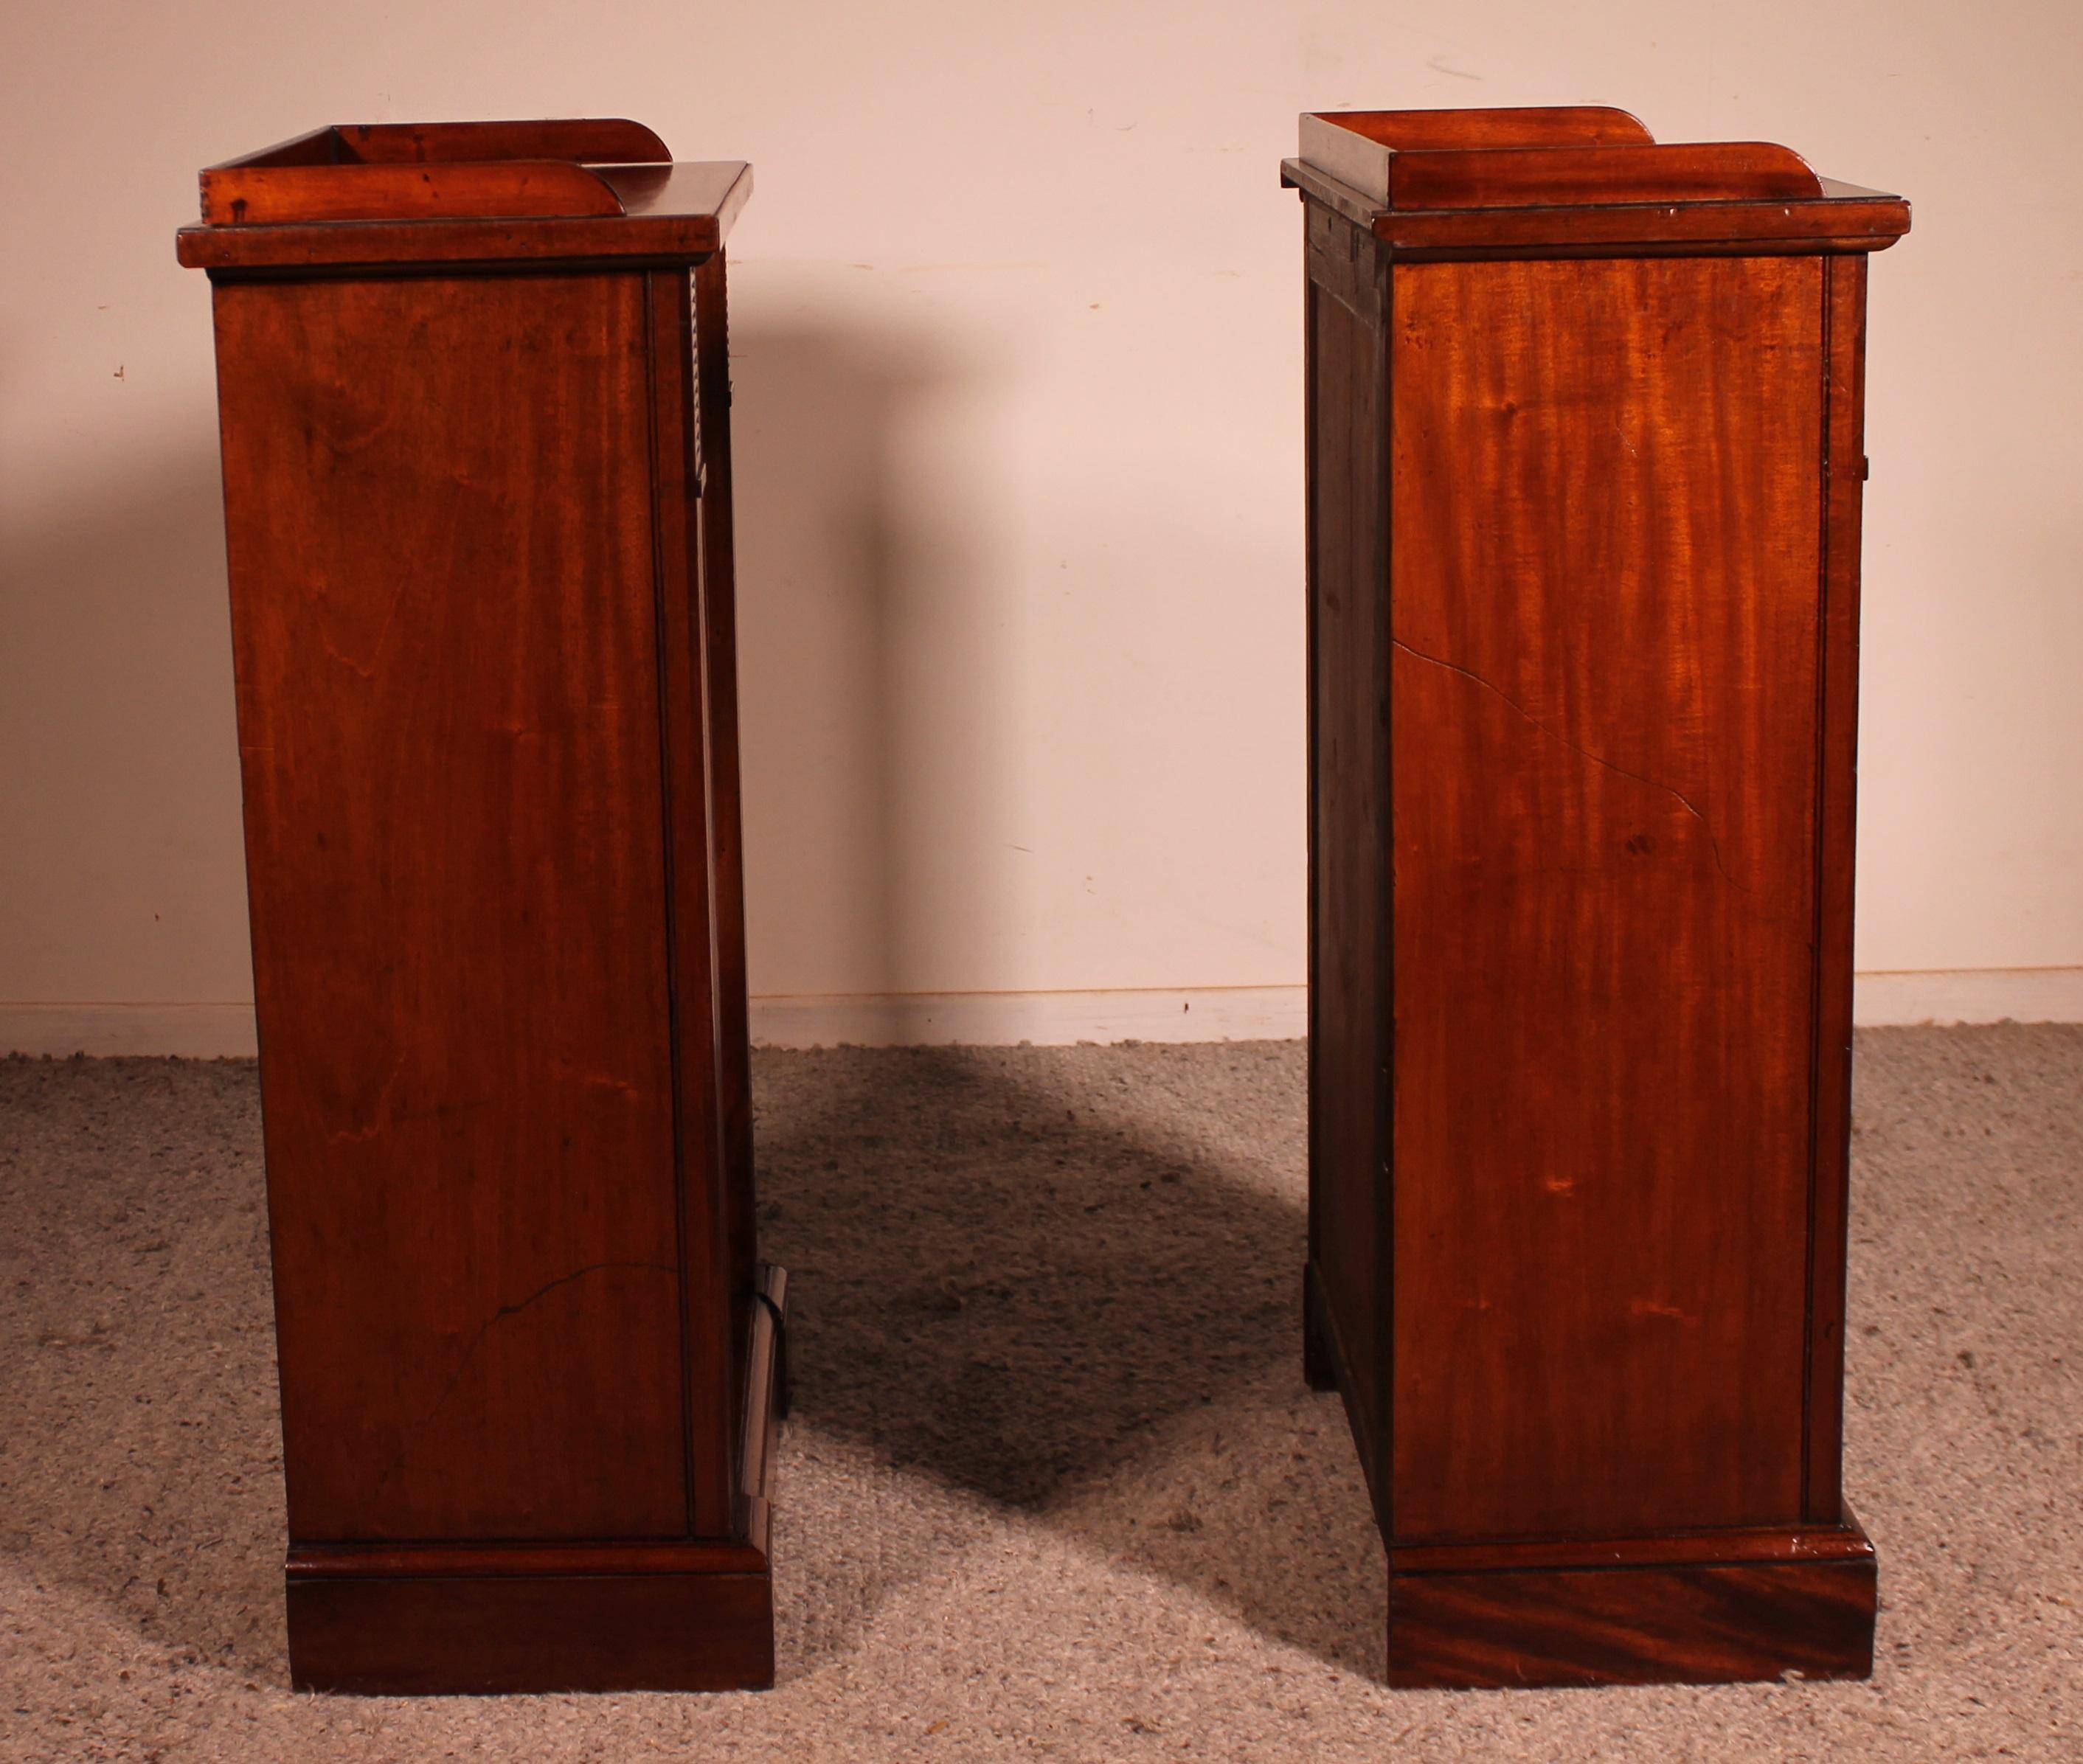 Pair of Open Bookcases from the Beginning of the 19th Century, William IV 3